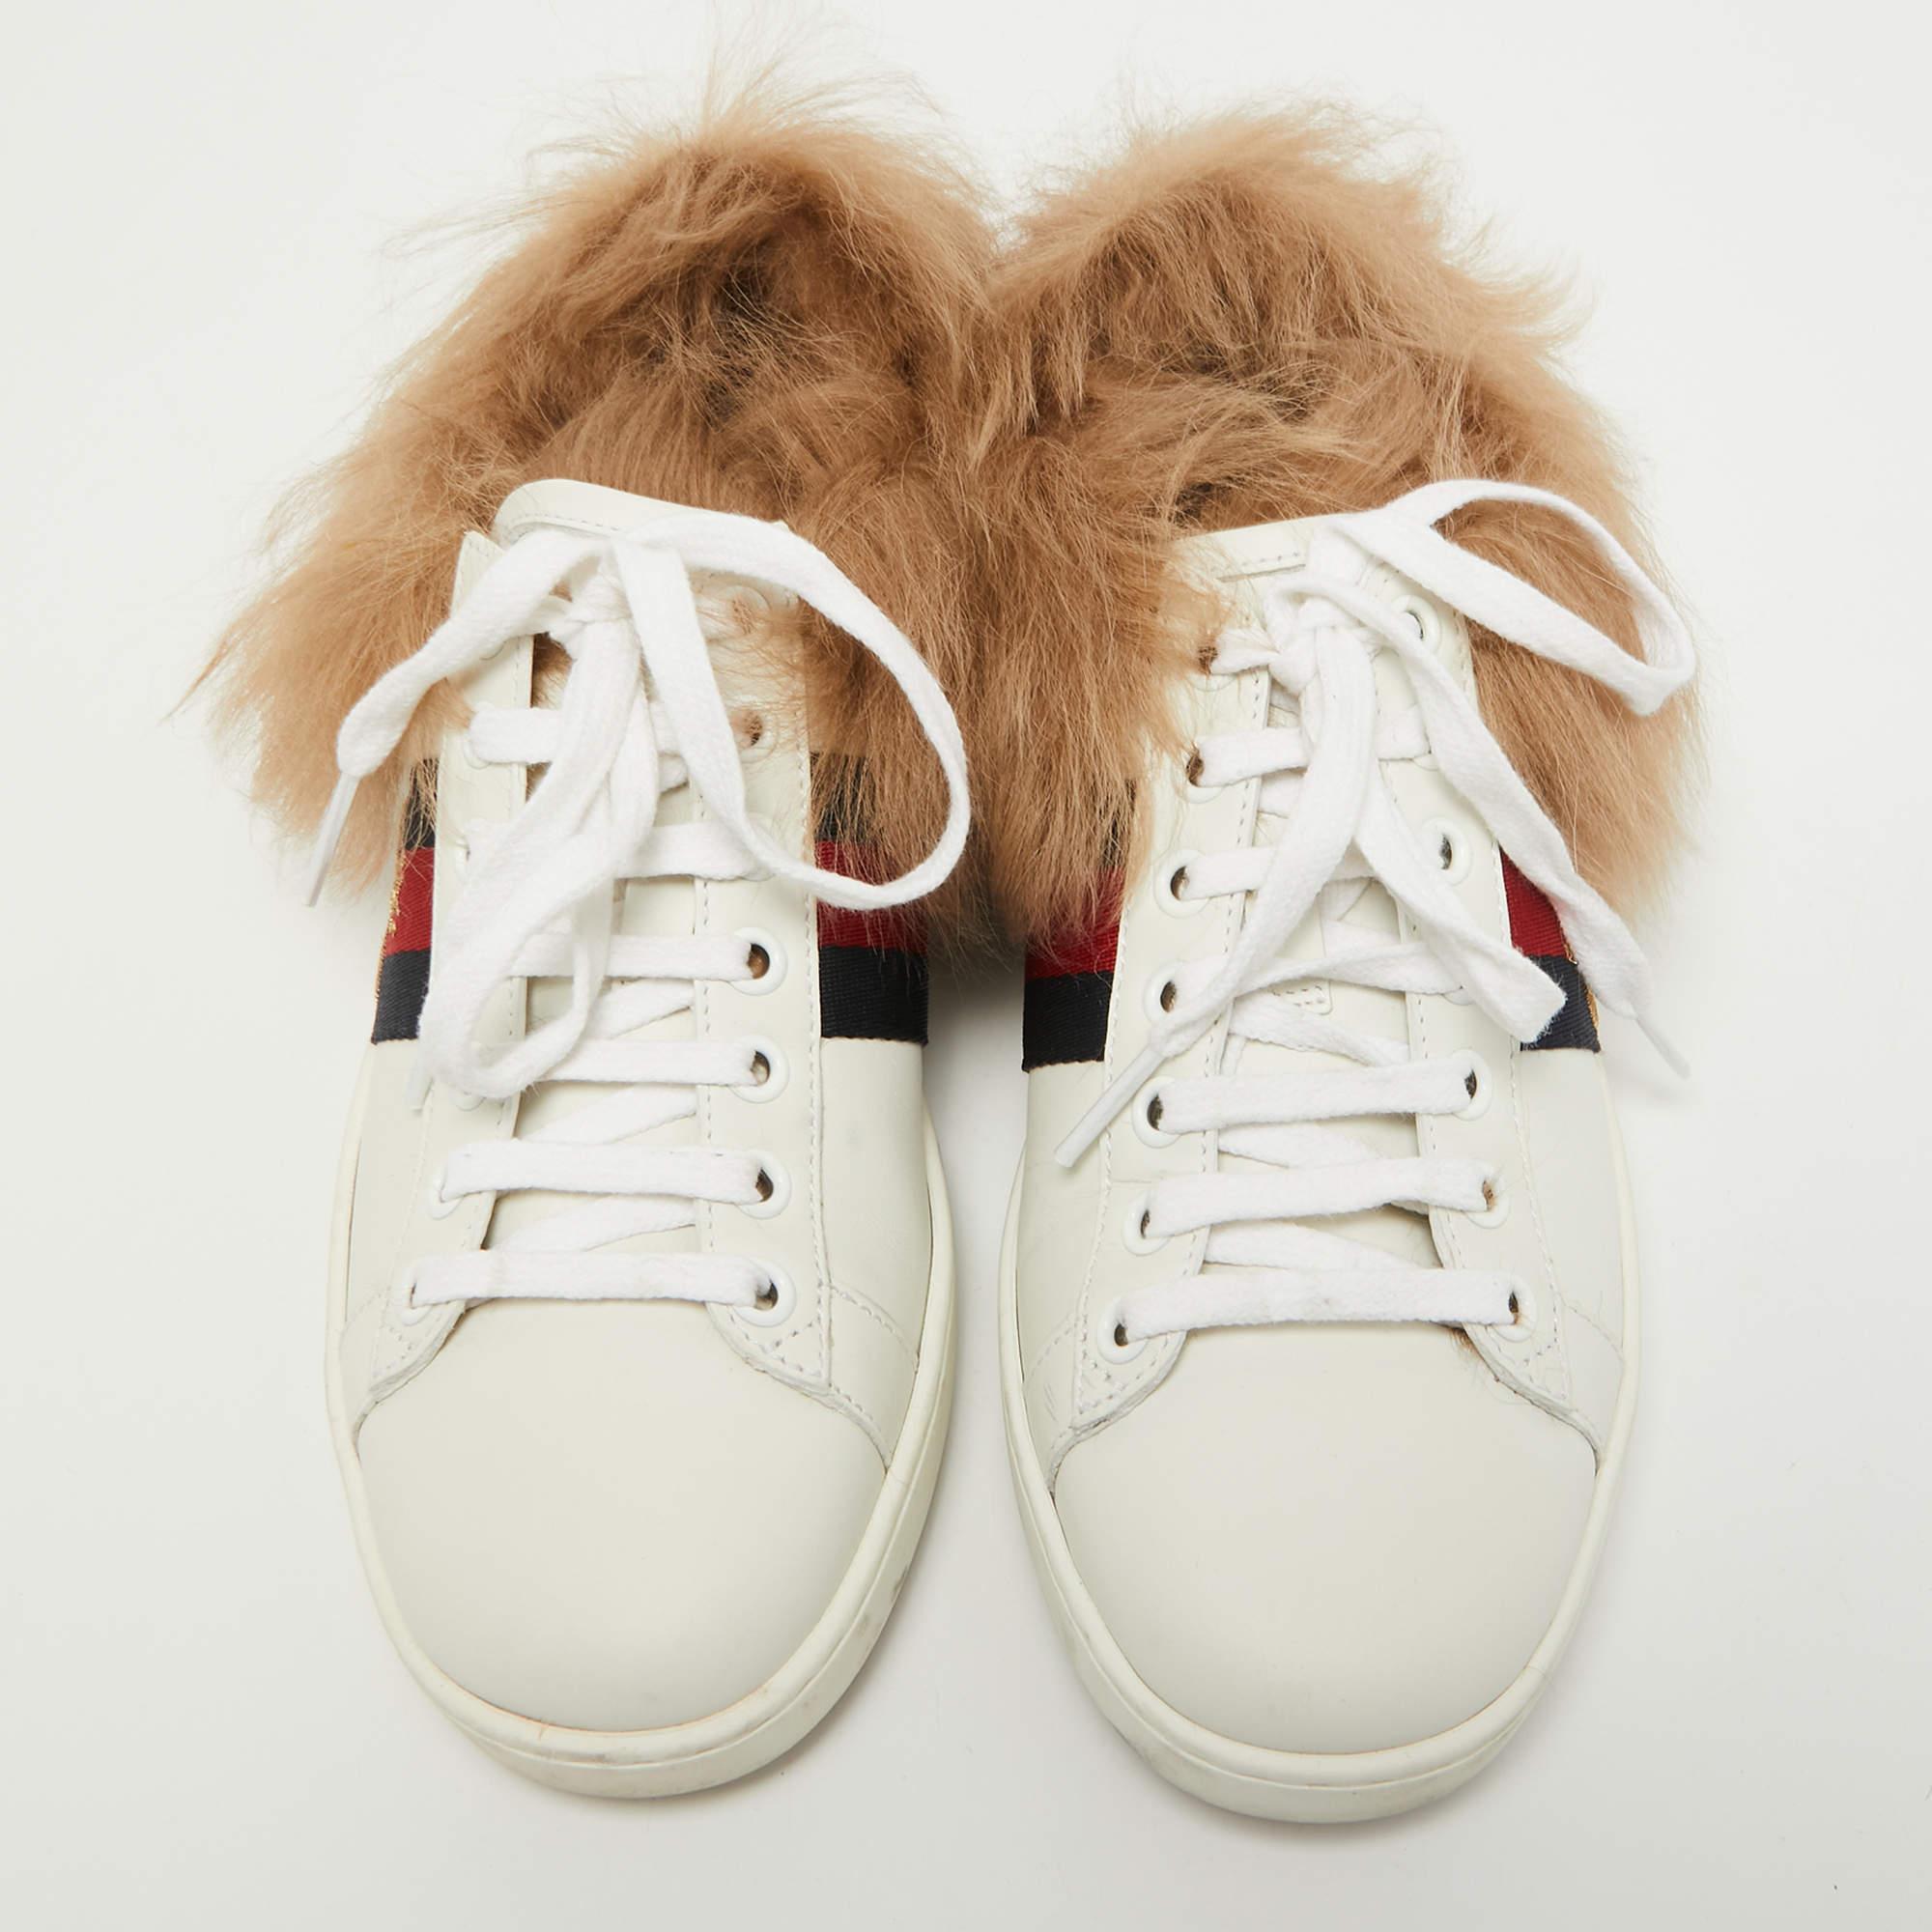 Give your outfit a luxe update with this pair of designer sneakers. The creation is sewn perfectly to help you make a statement in them for a long time.

